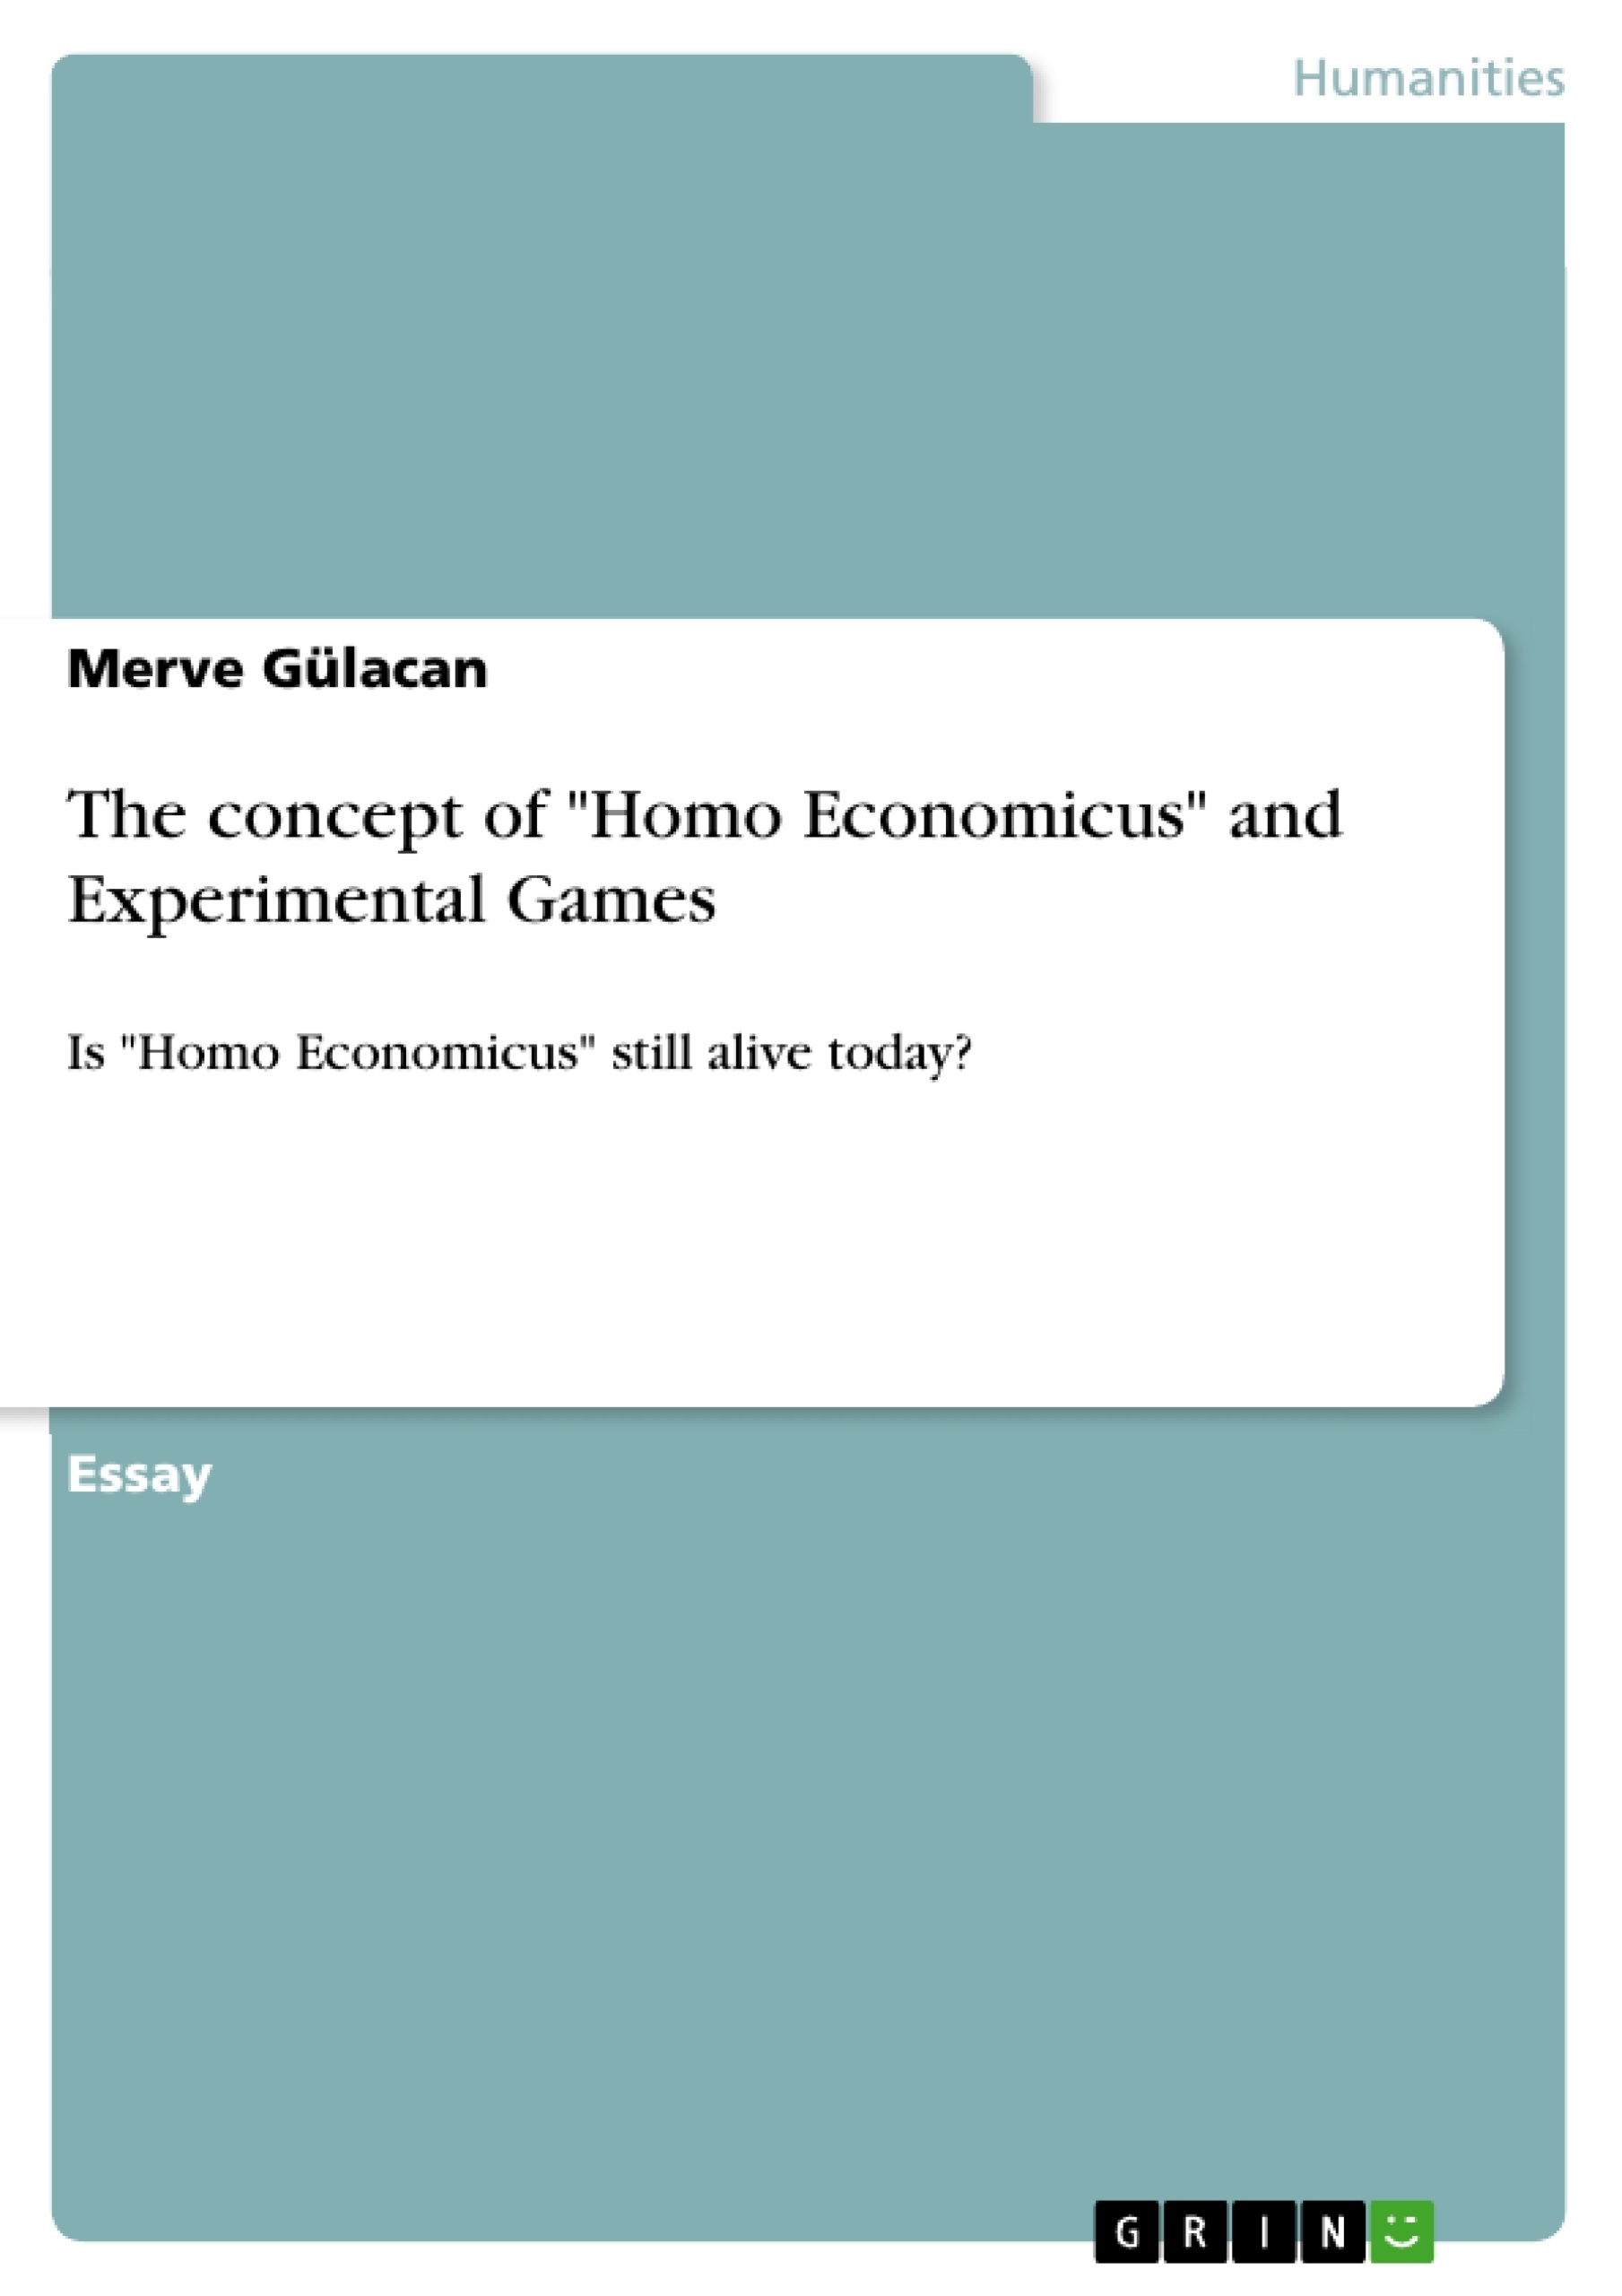 Title: The concept of "Homo Economicus" and Experimental Games